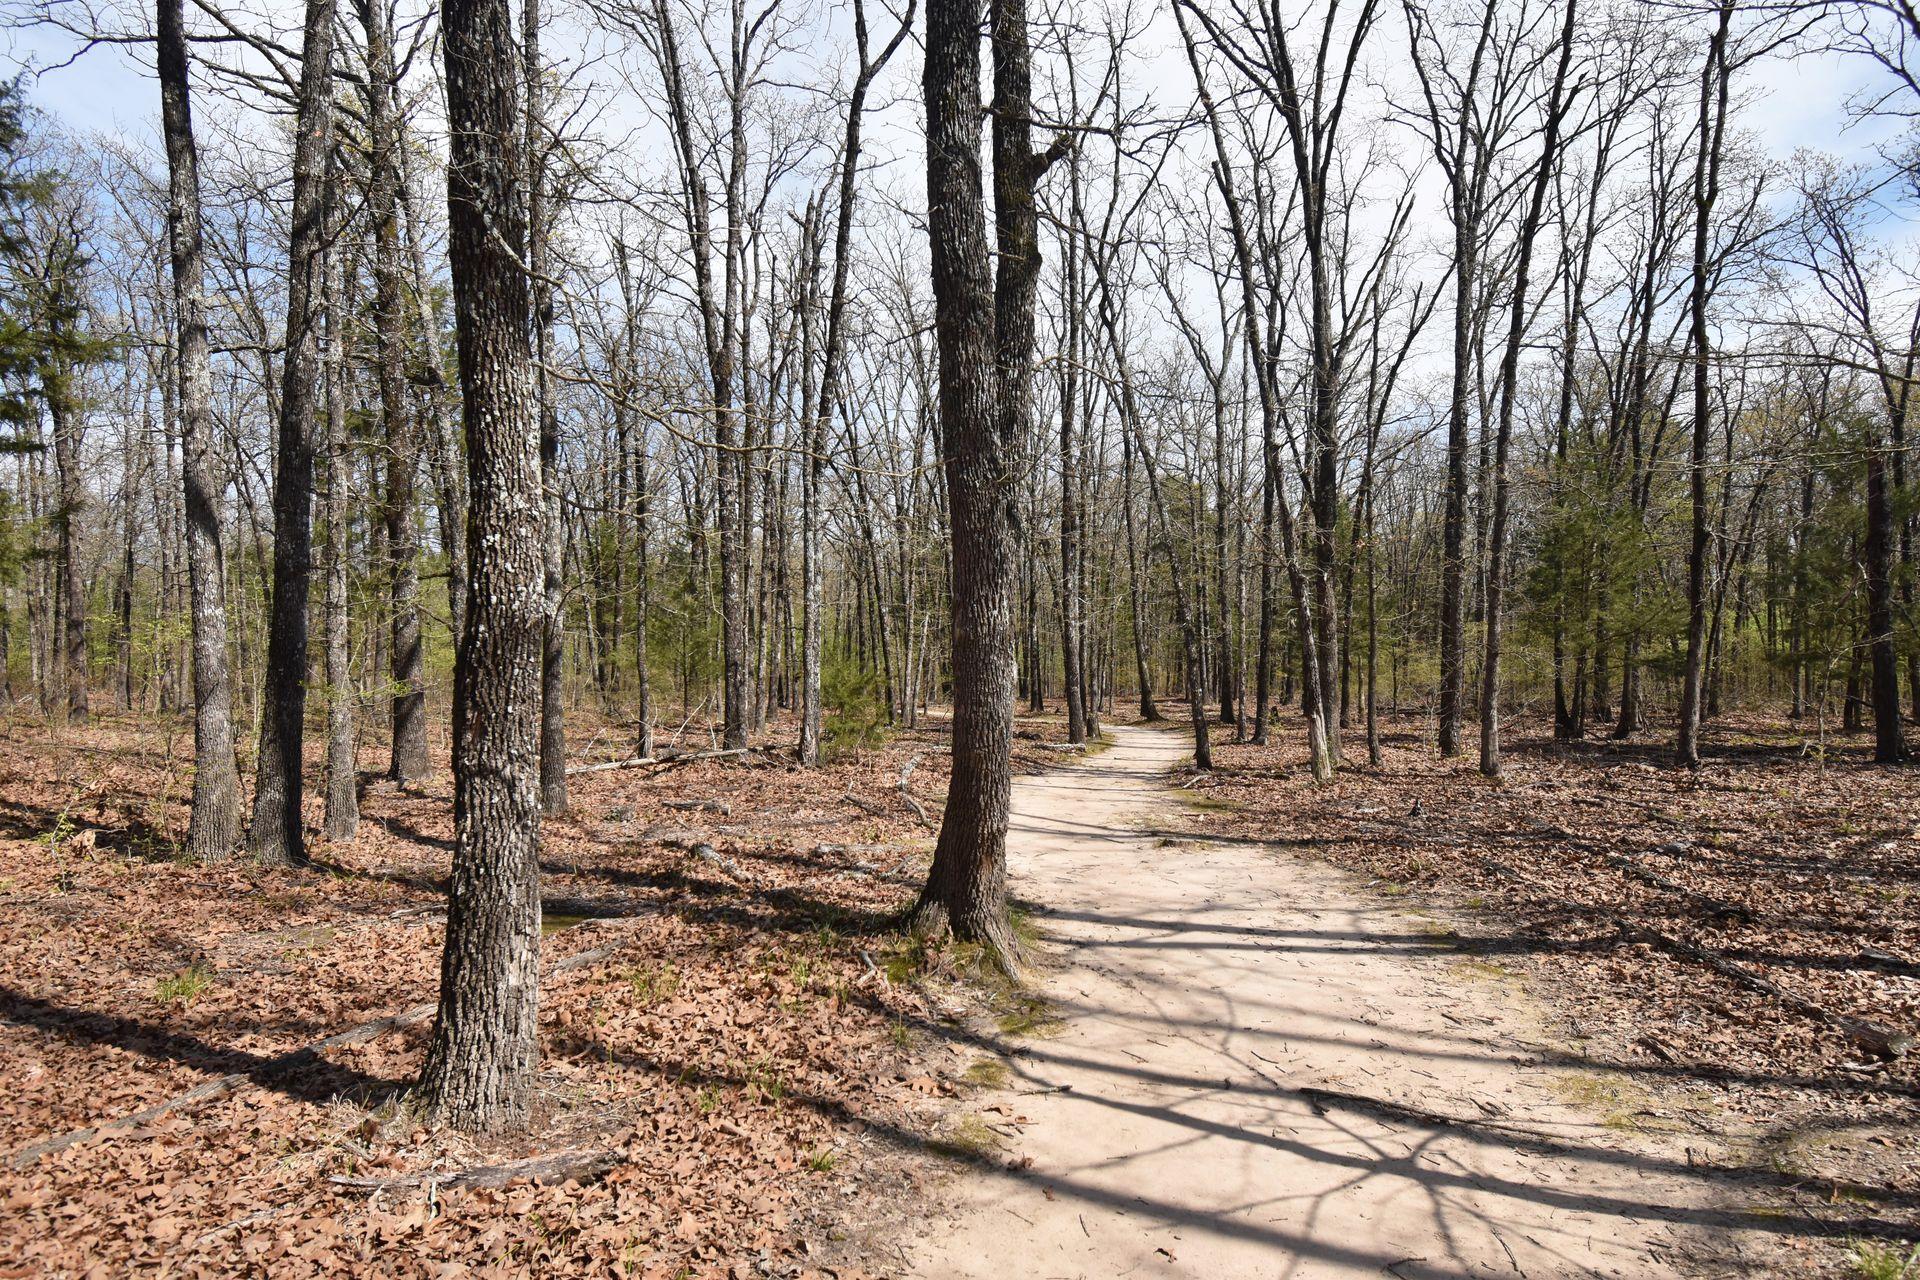 A well marked trail leading through a forest of bare trees. The ground below the trees is covered in leaves.